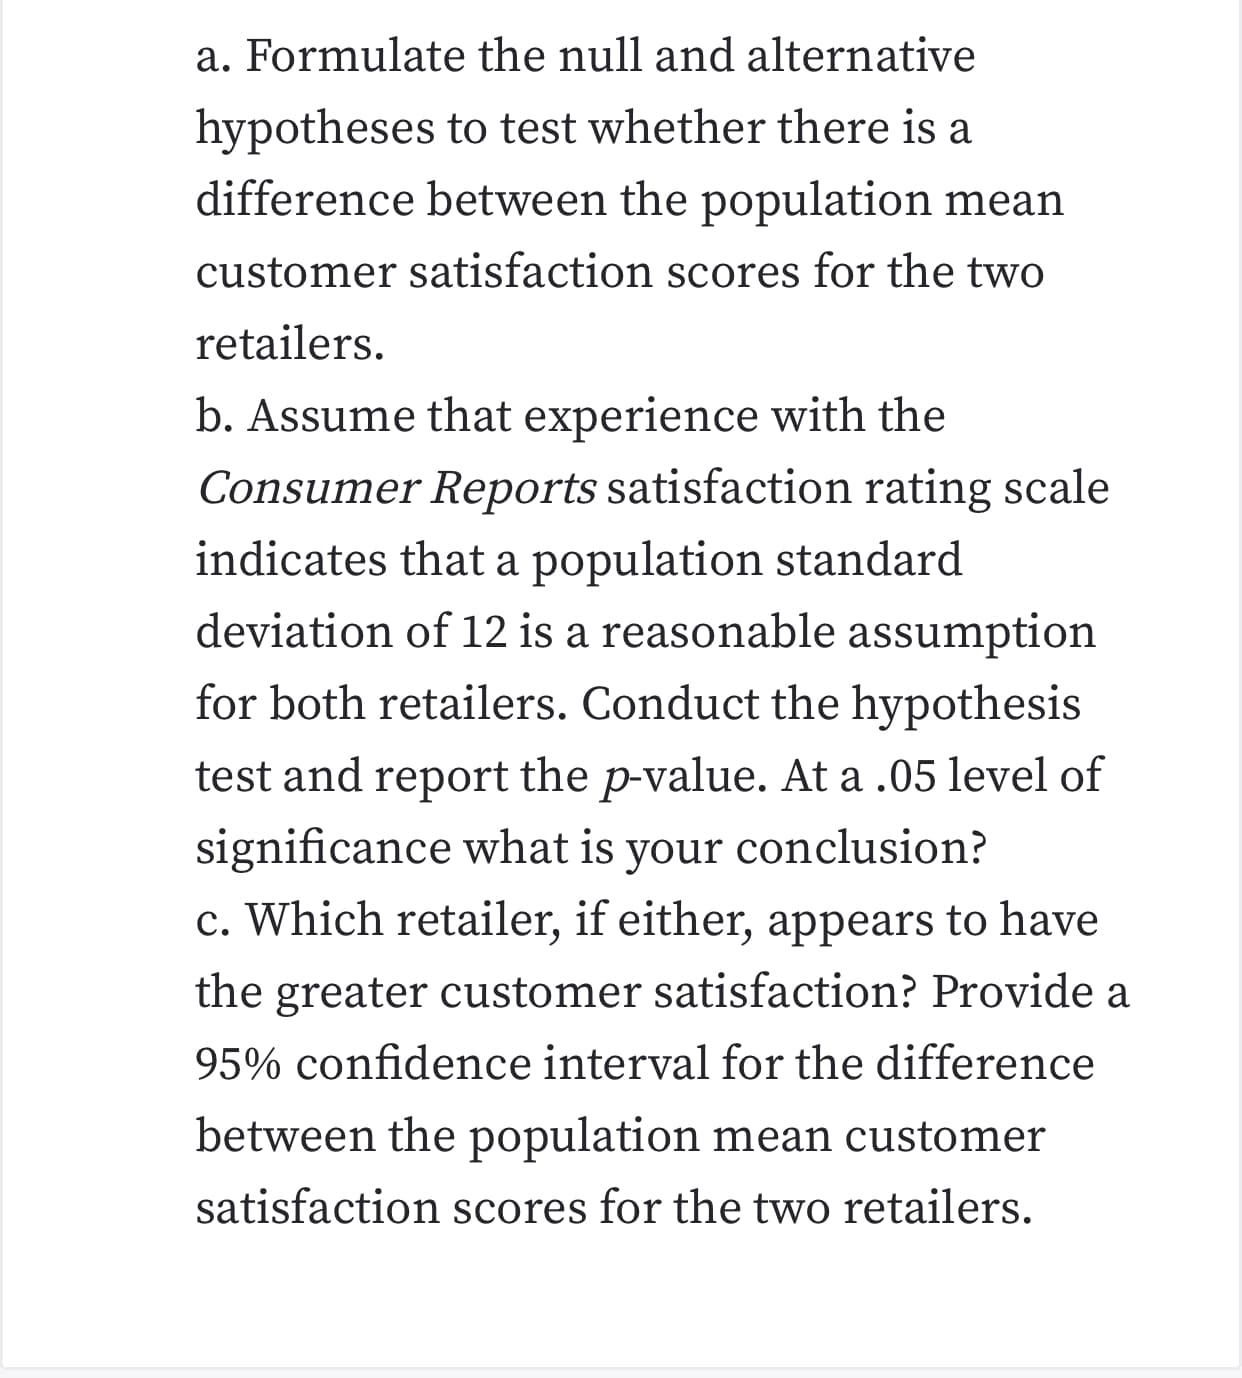 a. Formulate the null and alternative
hypotheses to test whether there is a
difference between the population mean
customer satisfaction scores for the two
retailers
b. Assume that experience with the
Consumer Reports satisfaction rating scale
indicates that a population standard
deviation of 12 is a reasonable assumption
for both retailers. Conduct the hypothesis
test and report the p-value. At a .05 level of
significance what is
c. Which retailer, if either, appears to have
conclusion?
your
the greater customer satisfaction? Provide a
95% confidence interval for the difference
between the population mean customer
satisfaction scores for the two retailers
